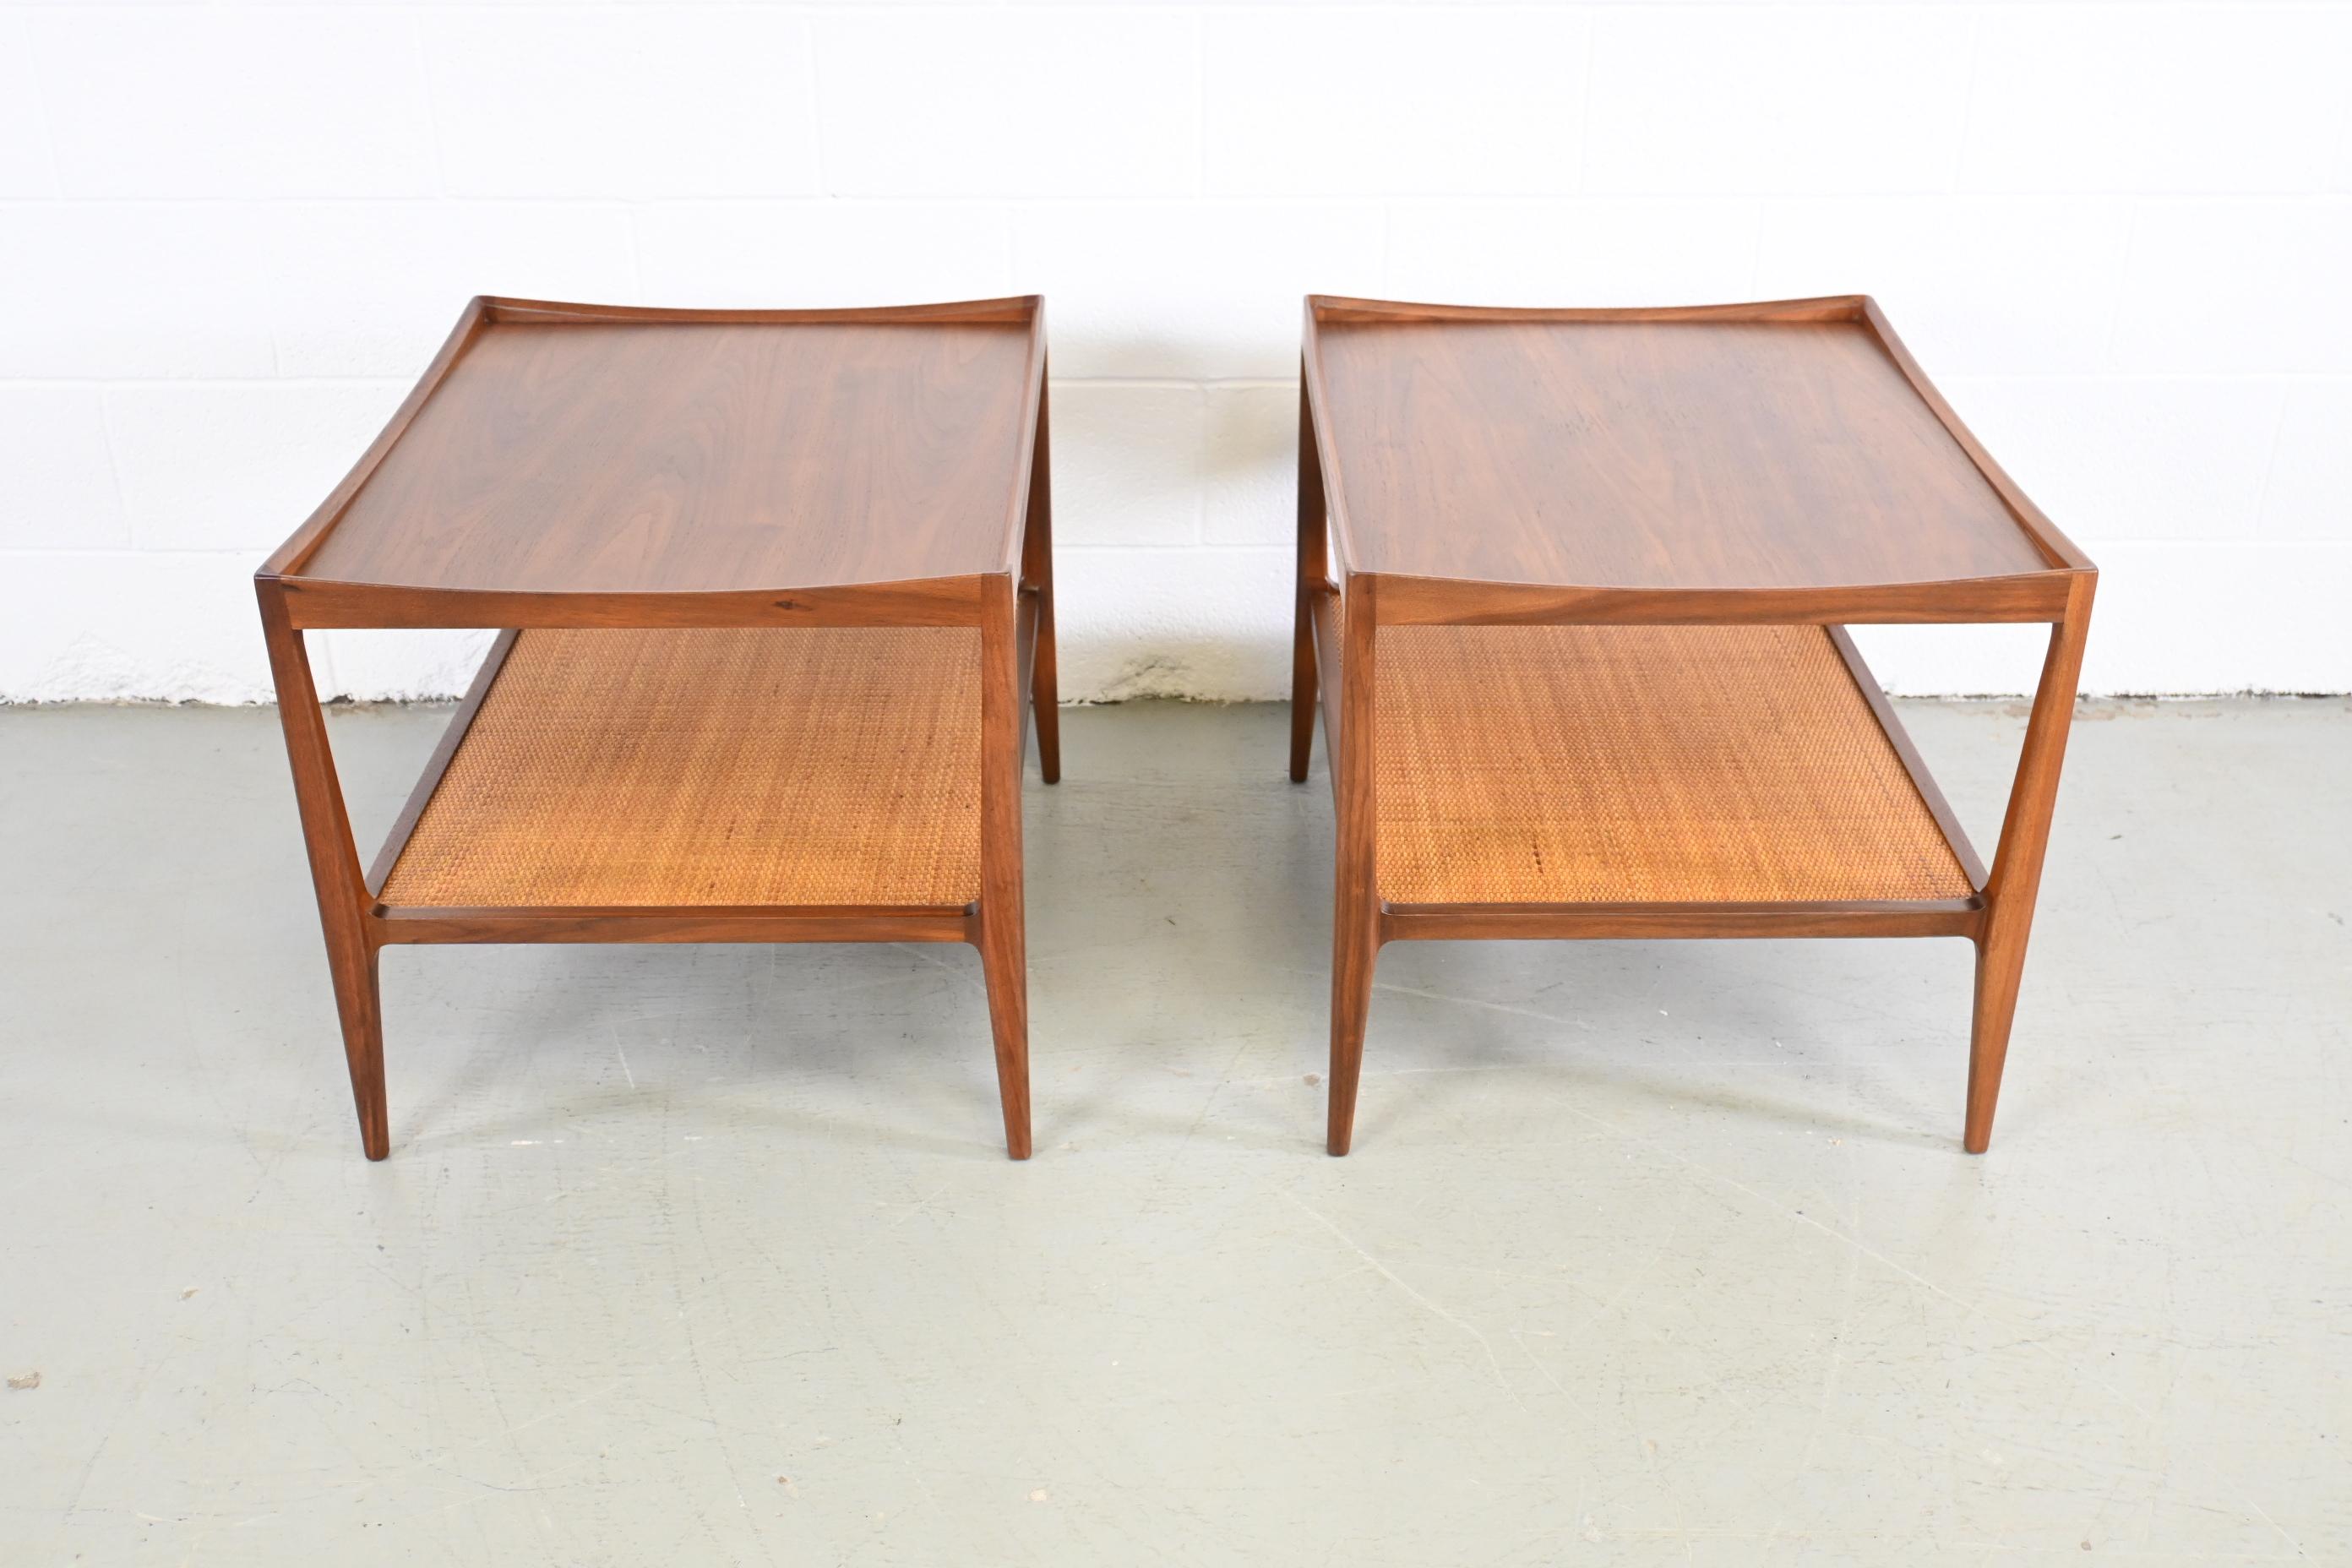 Heritage Mid-Century Modern pair of end or side tables

Heritage Furniture, USA, 1950s

23 Wide x 28 Deep x 22 High

Mid century modern walnut set of end or side tables with woven rattan on shelf.

Professionally refinished. Excellent condition.